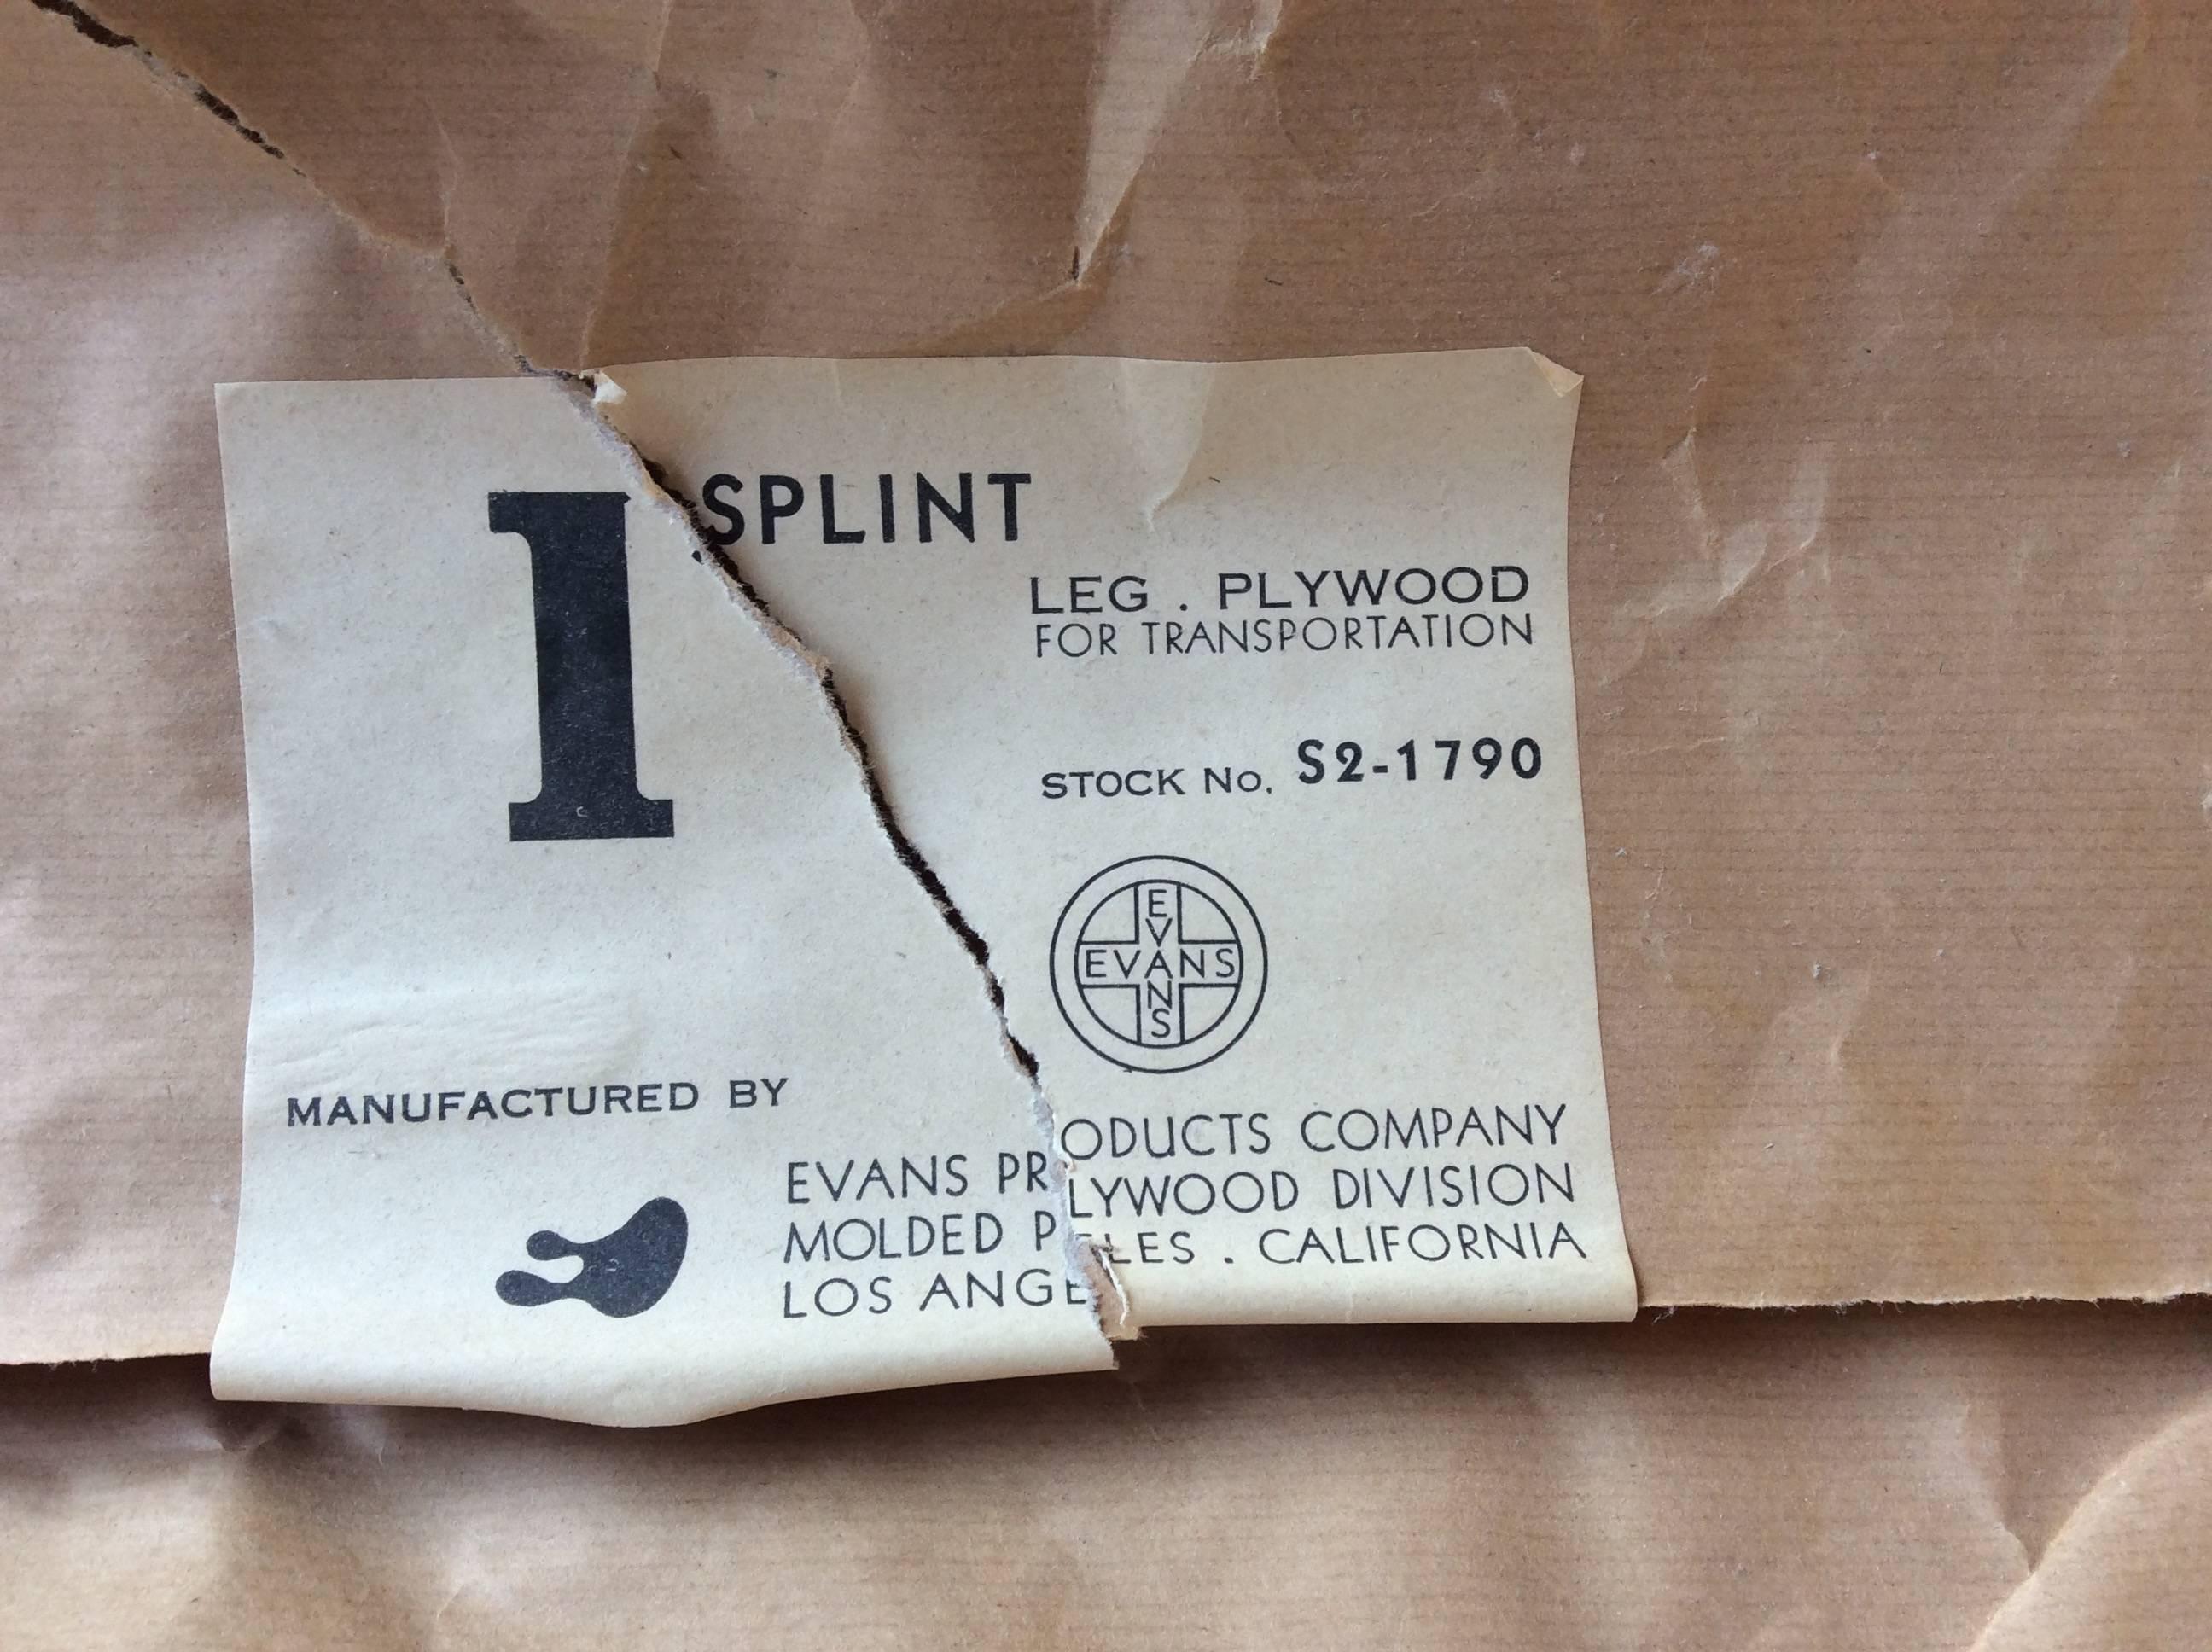 Rare Eames plywood leg splint from Evans Products Company, in original wrapper with label, circa 1943. Label and wrapper are torn.